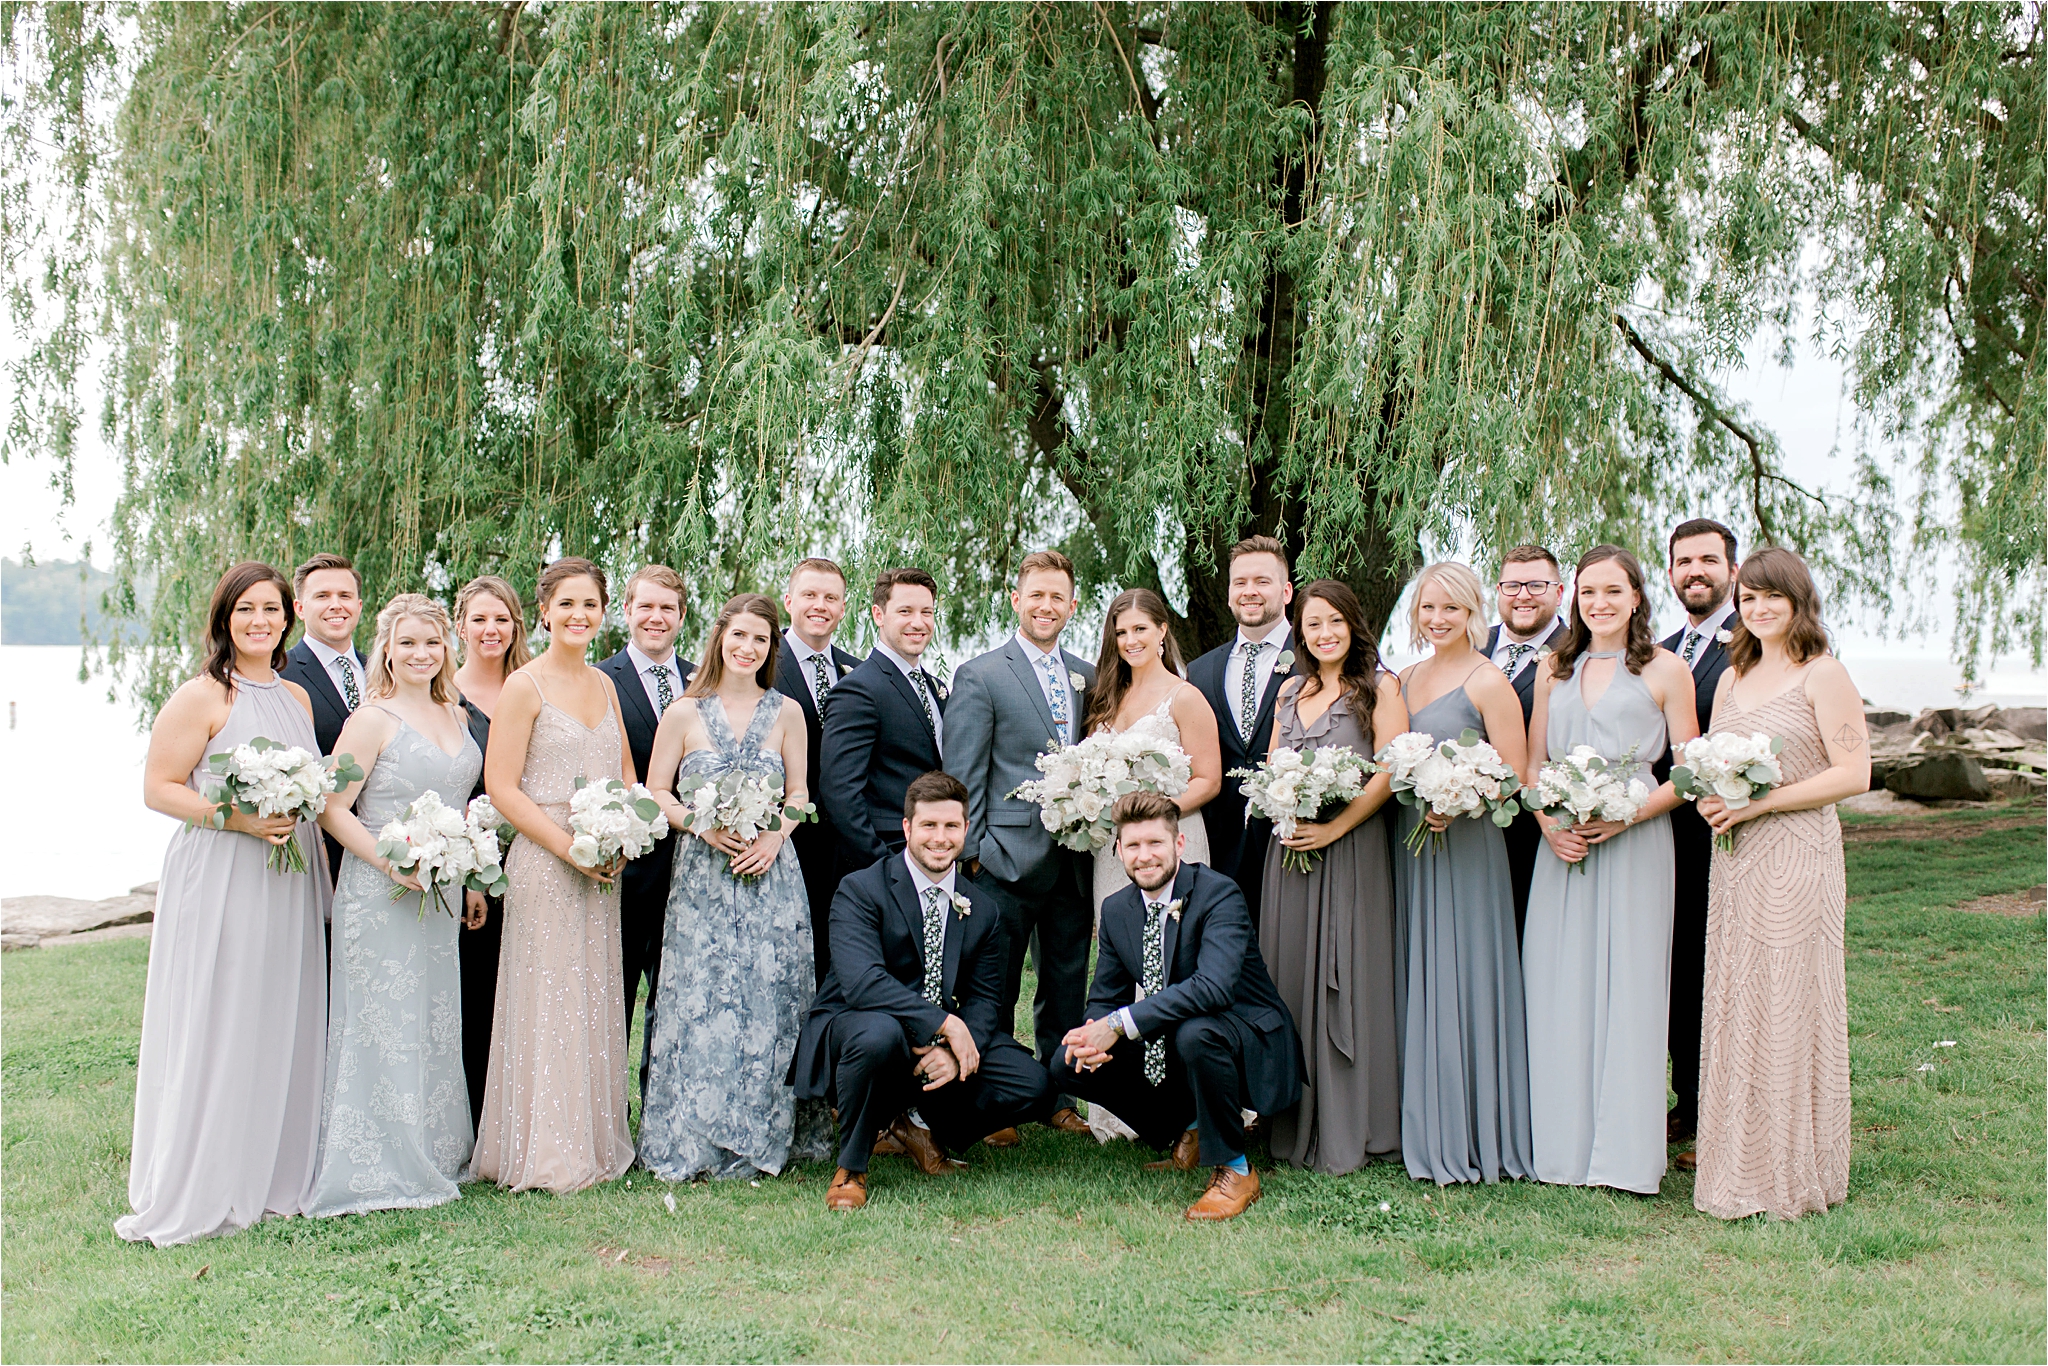 large bridal party photo blue and neutral wedding inspiration